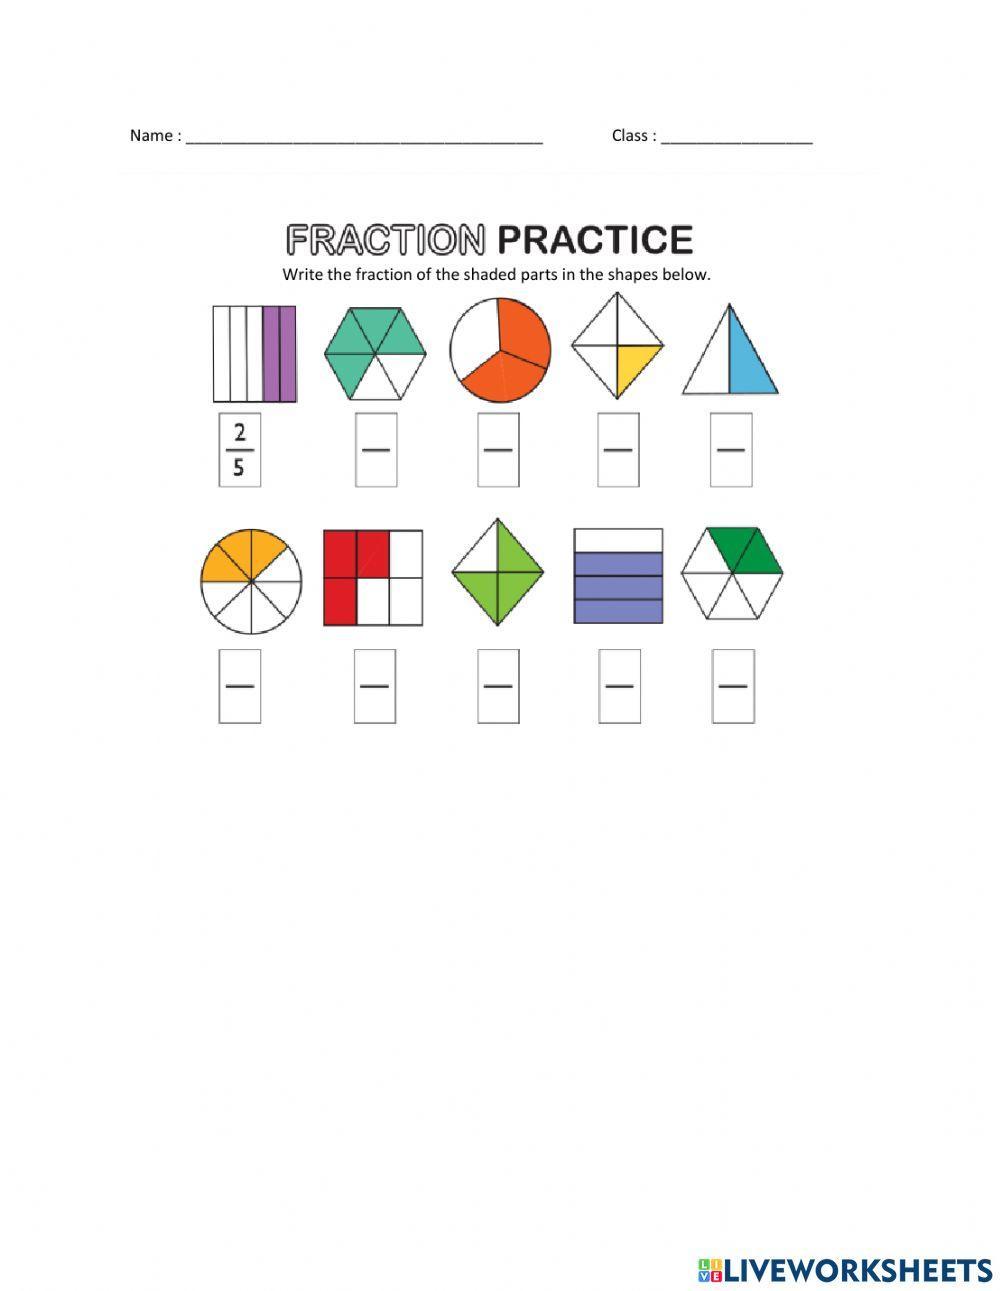 Writing the fraction